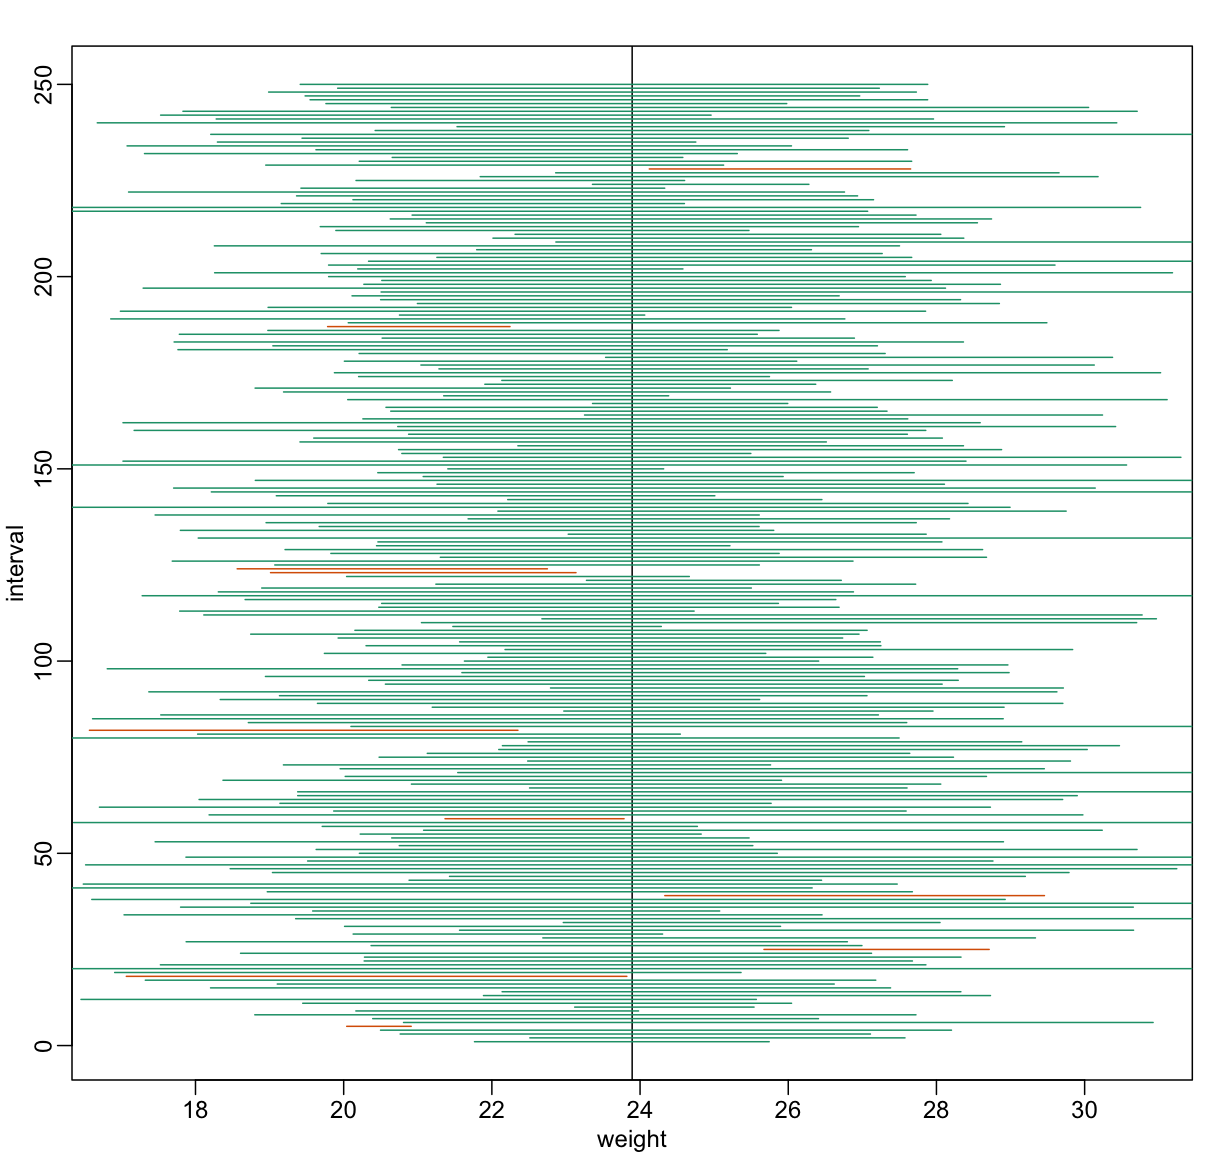 We show 250 random realizations of 95% confidence intervals, but now for a smaller sample size. The confidence is now based on the t-distribution approximation. The color denotes if the interval fell on the parameter or not.